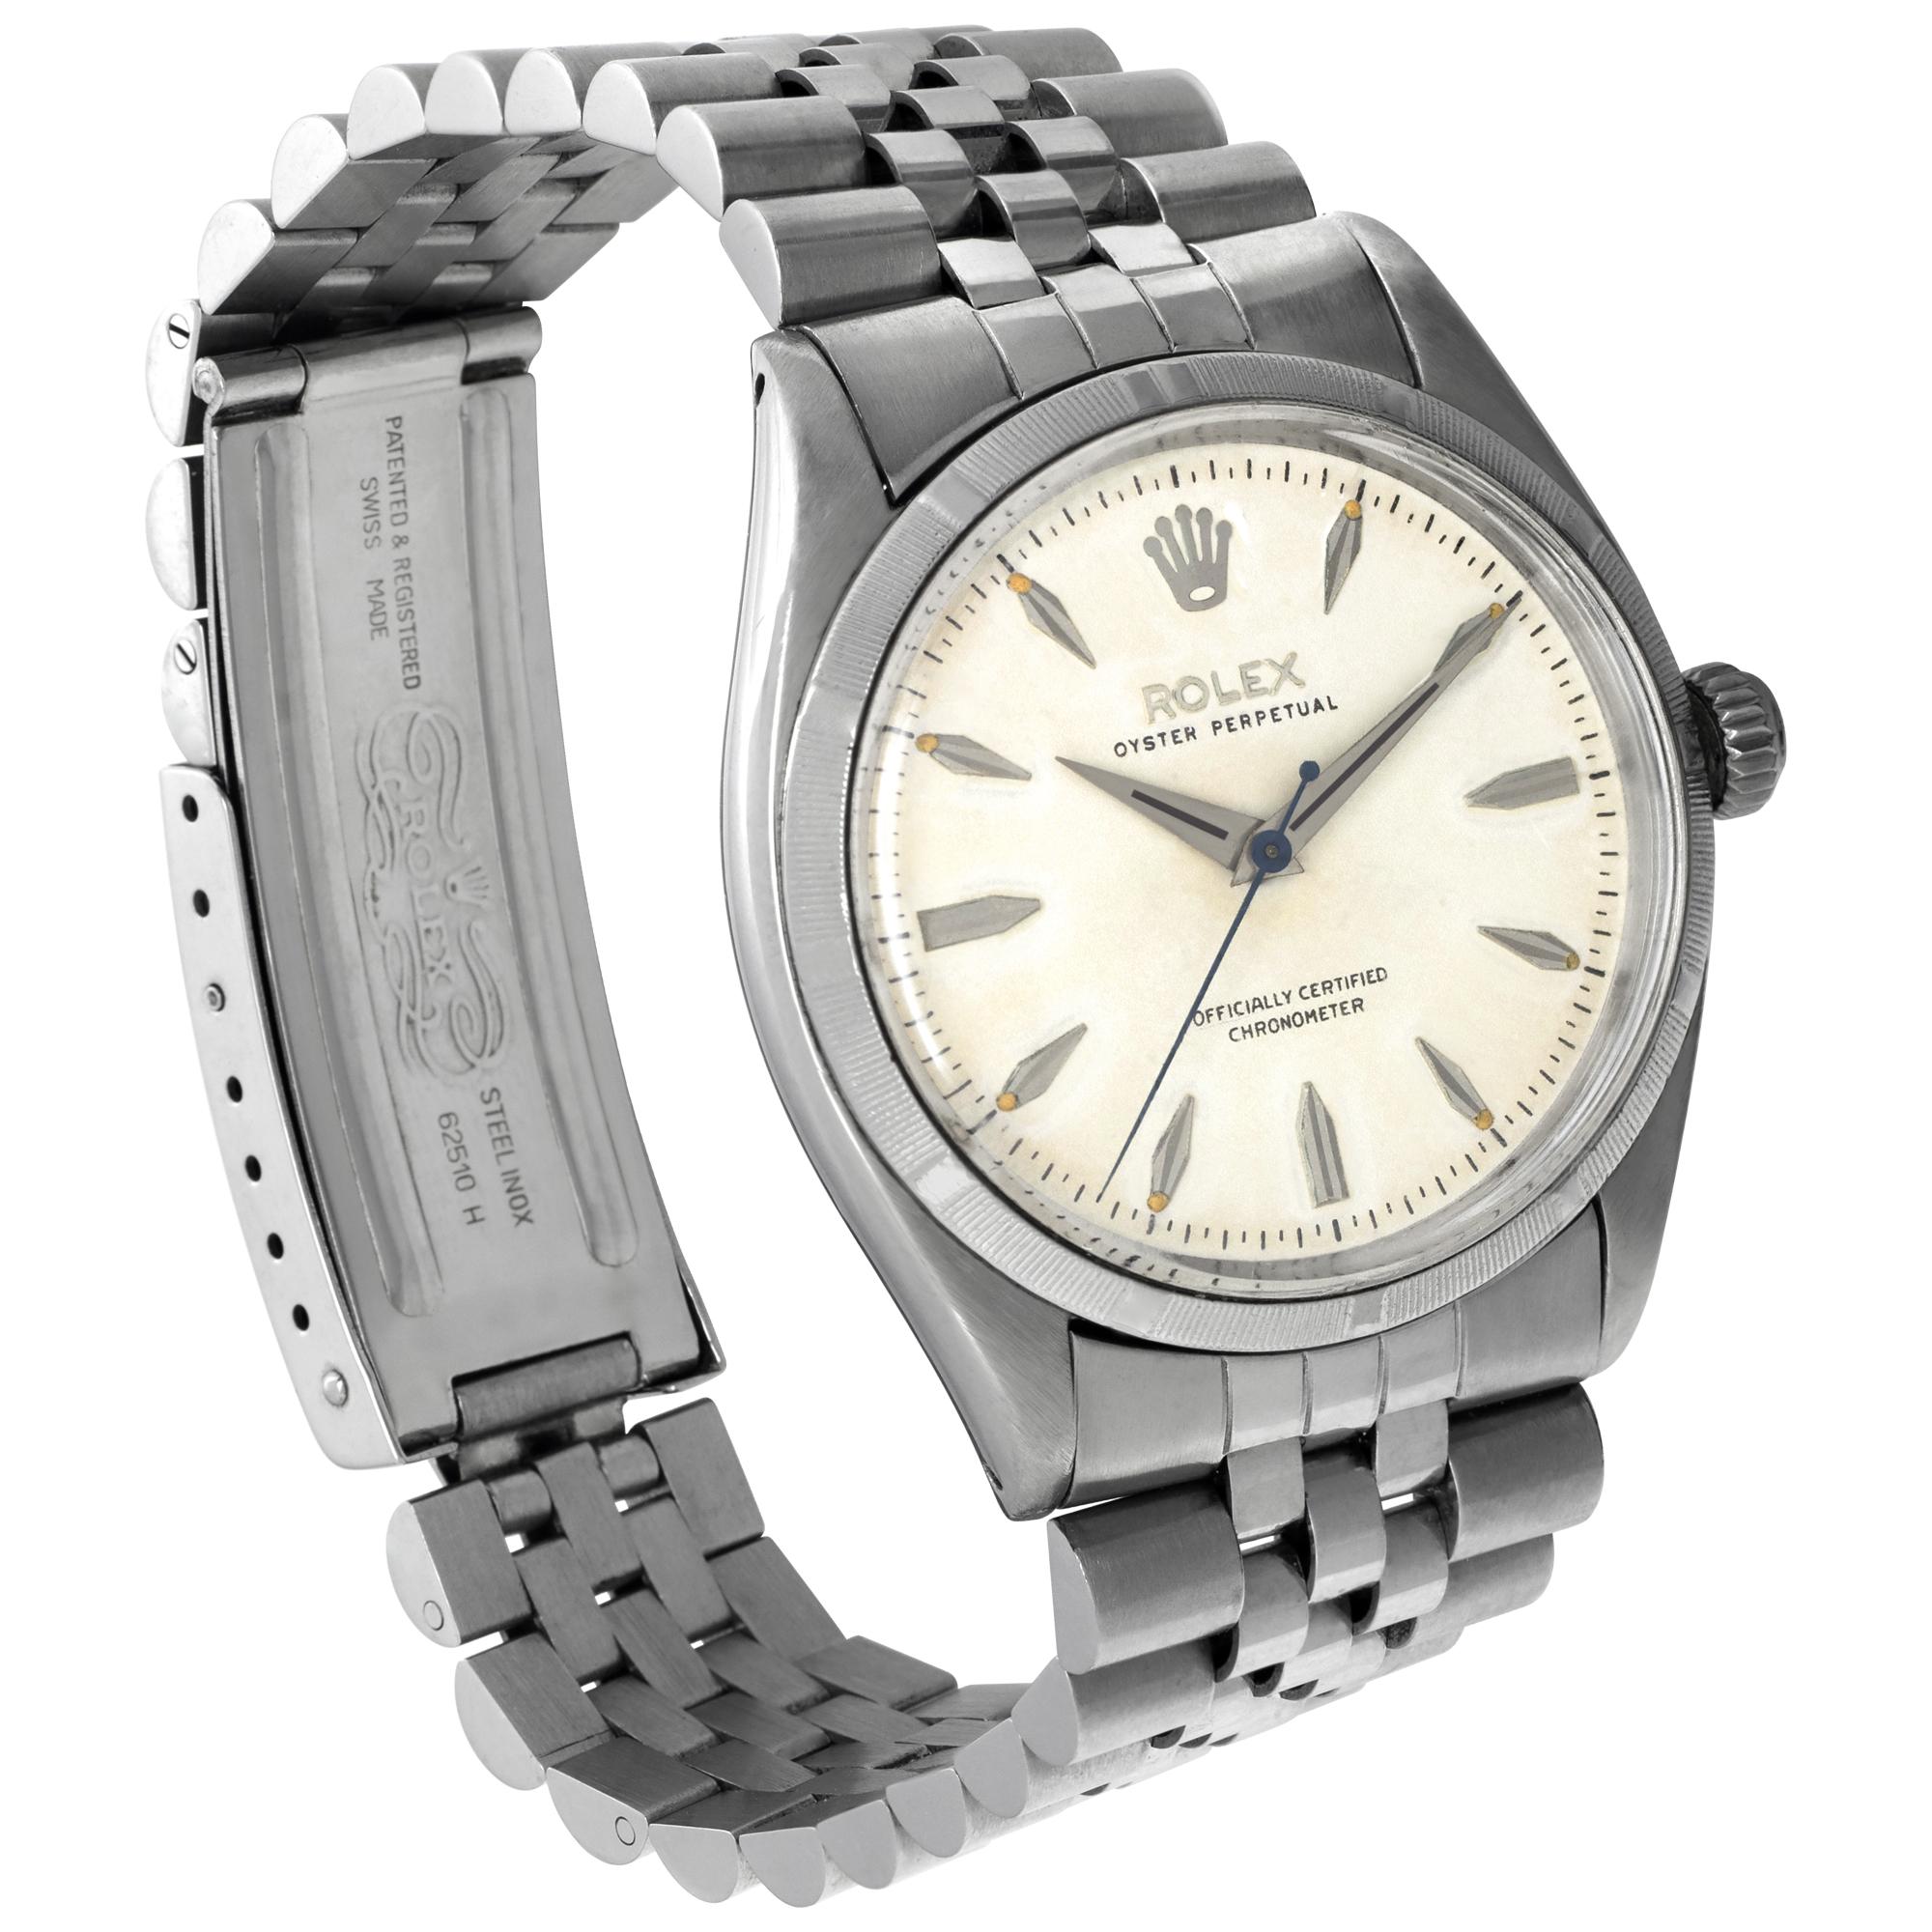 Rolex Oyster Perpetual stainless steel Automatic Wristwatch Ref 6565 In Excellent Condition For Sale In Surfside, FL